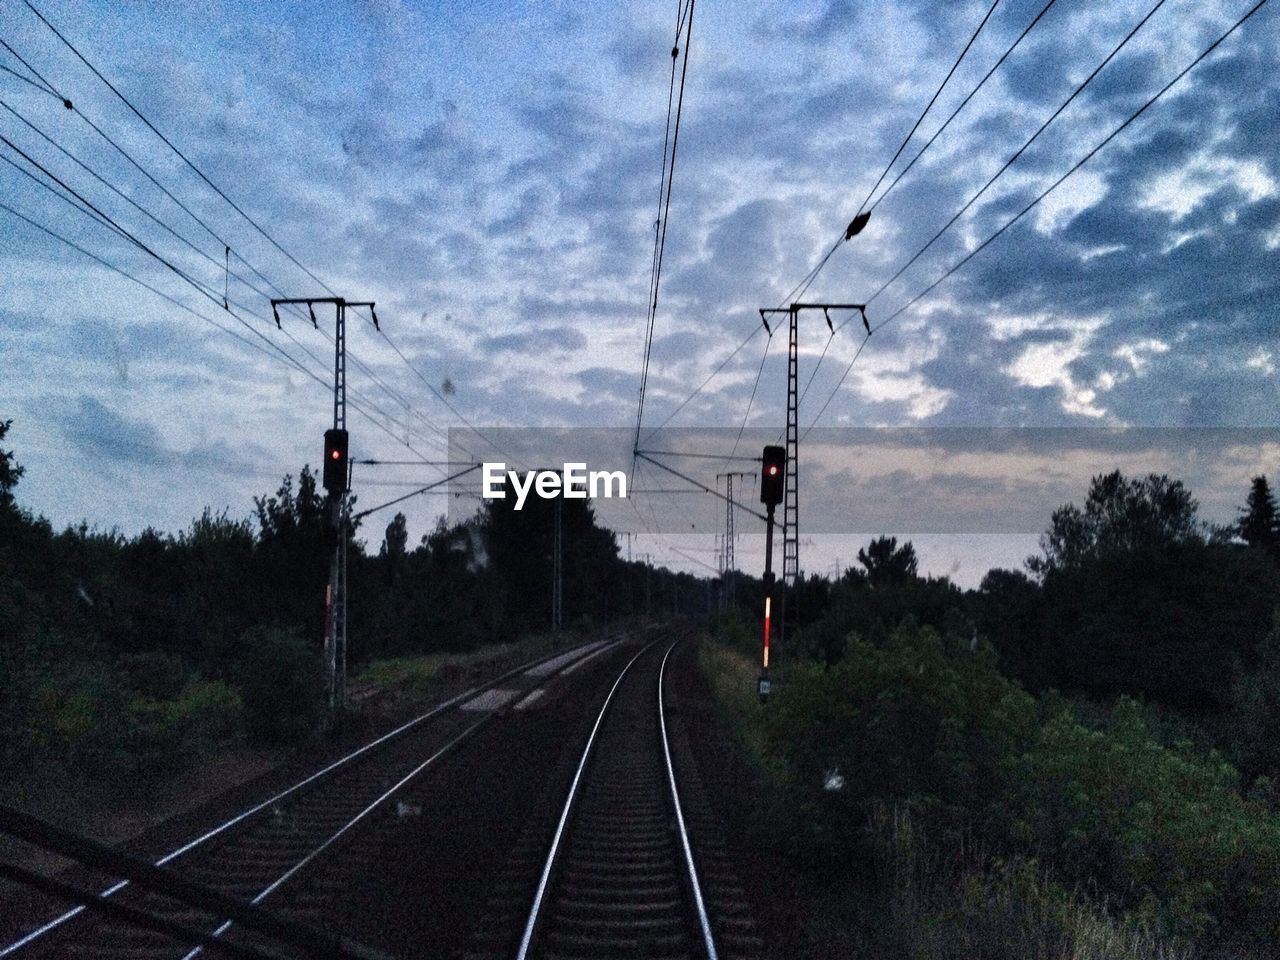 Railway tracks and electricity pylons against cloudy sky at dusk